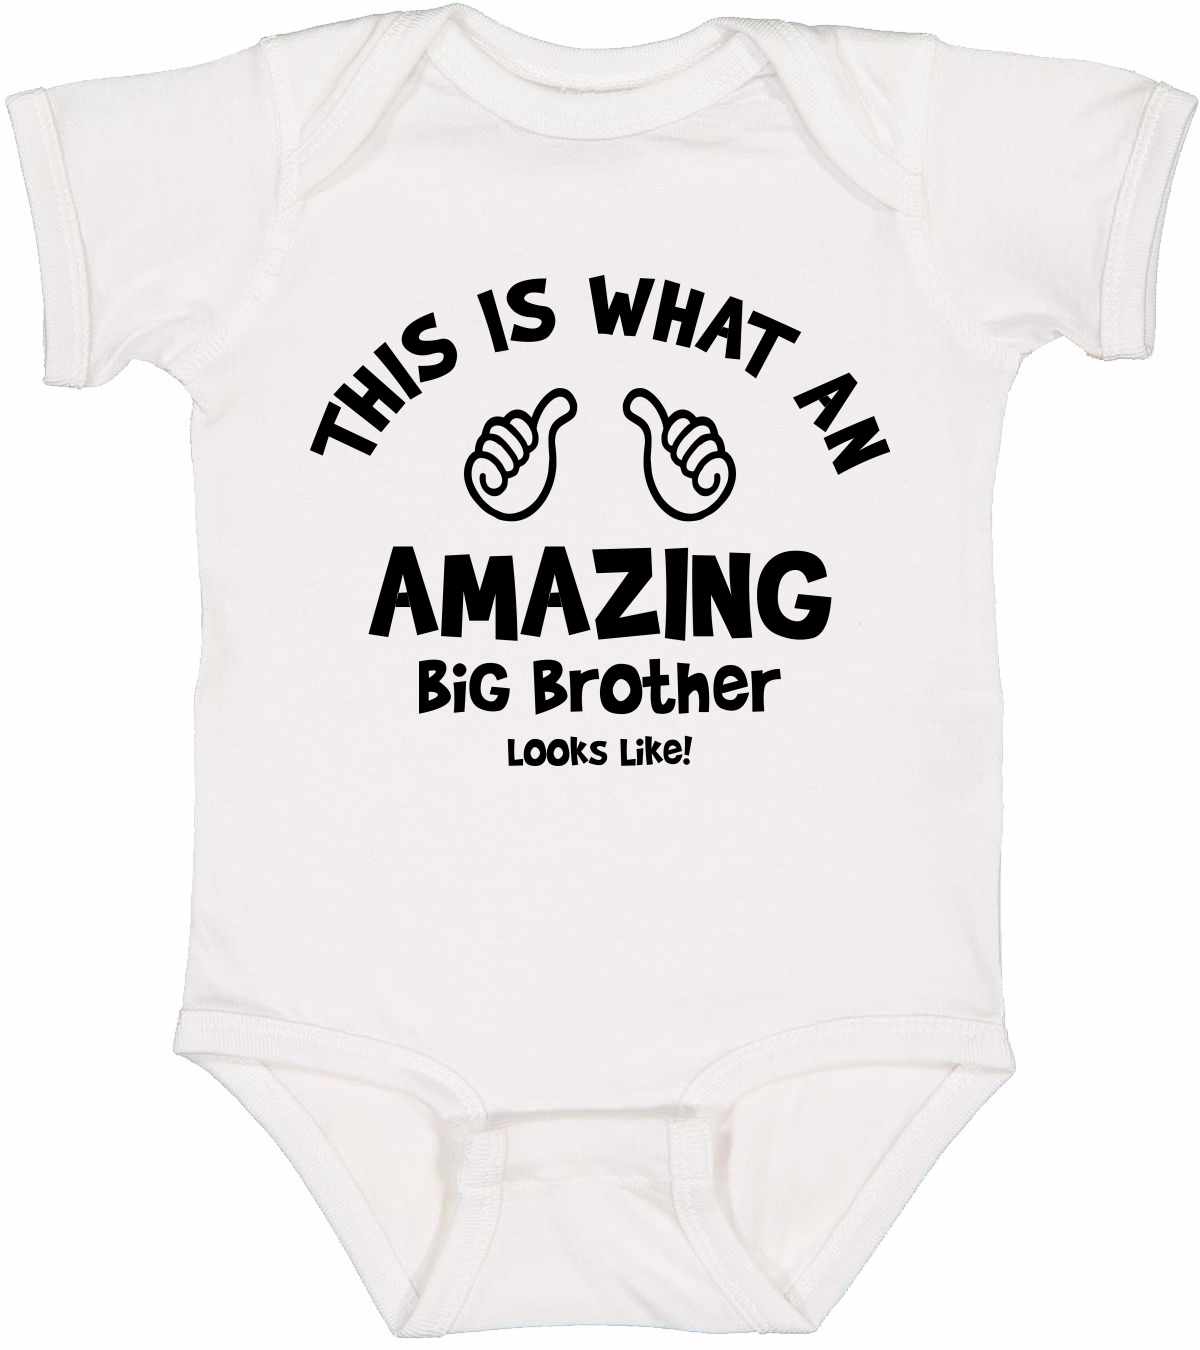 This is What an AMAZING Big Brother Looks Like Infant BodySuit (#1115-10)